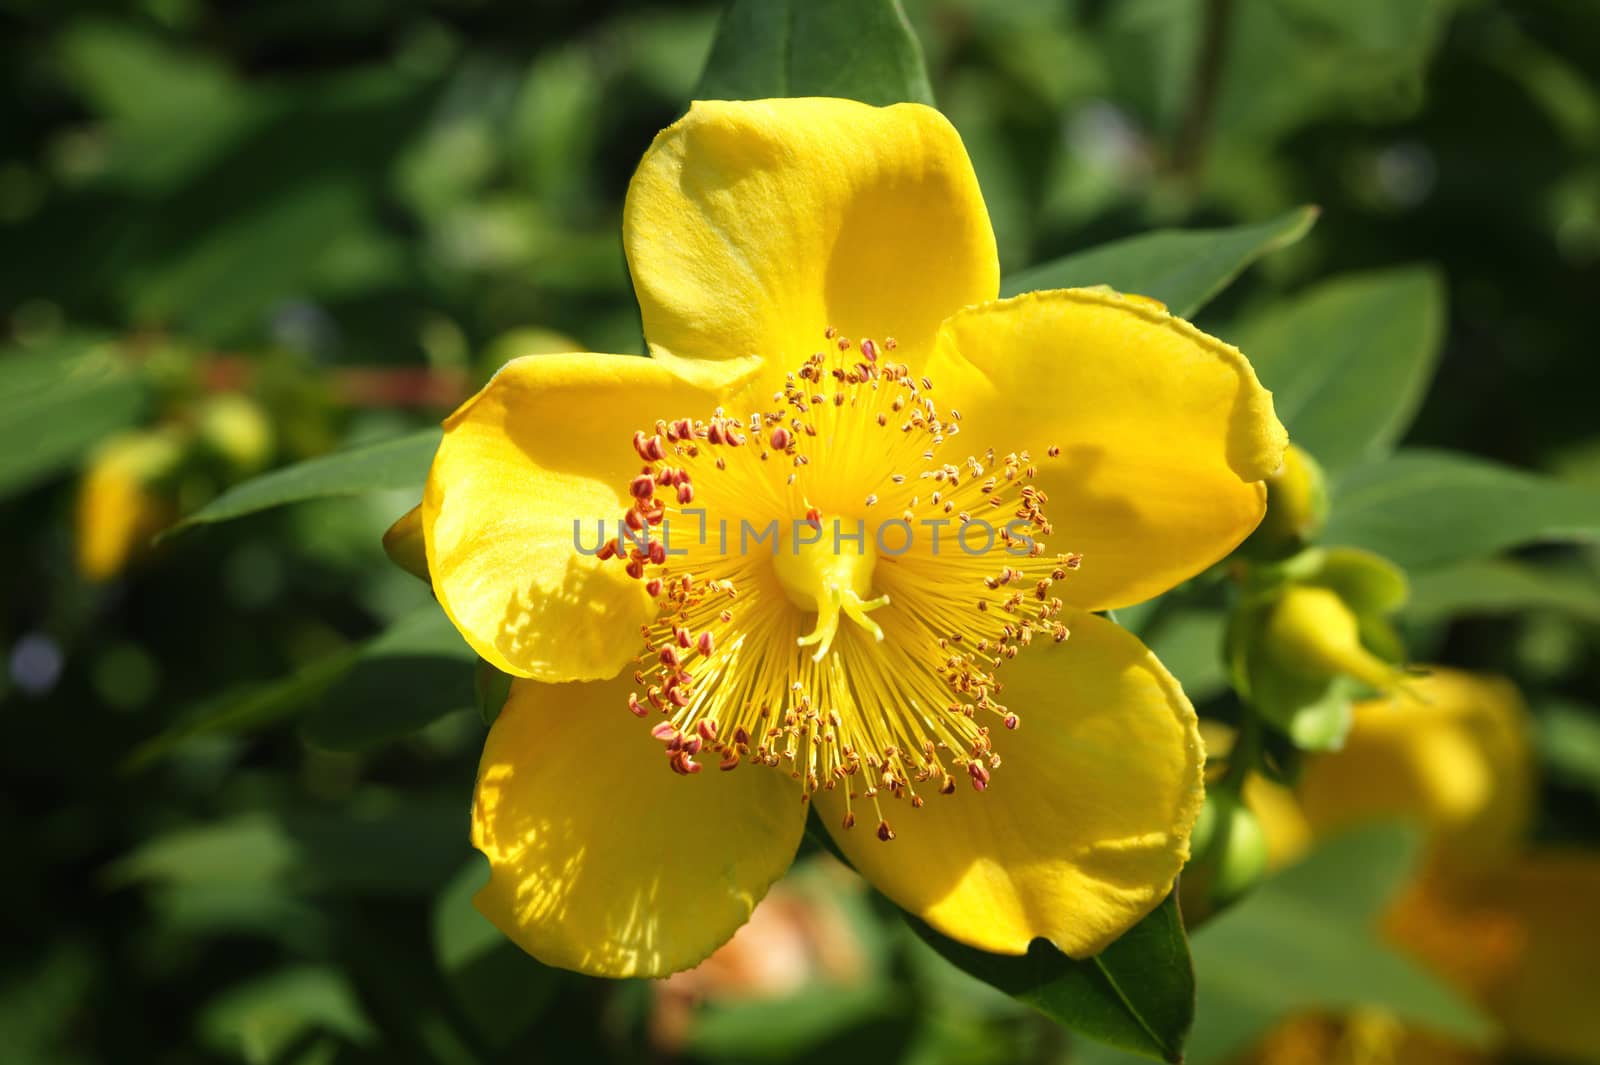 Hypericum x moserianum commonly known as  St John's Wort which is a yellow flower shrub used in herbal medicine to treat depression